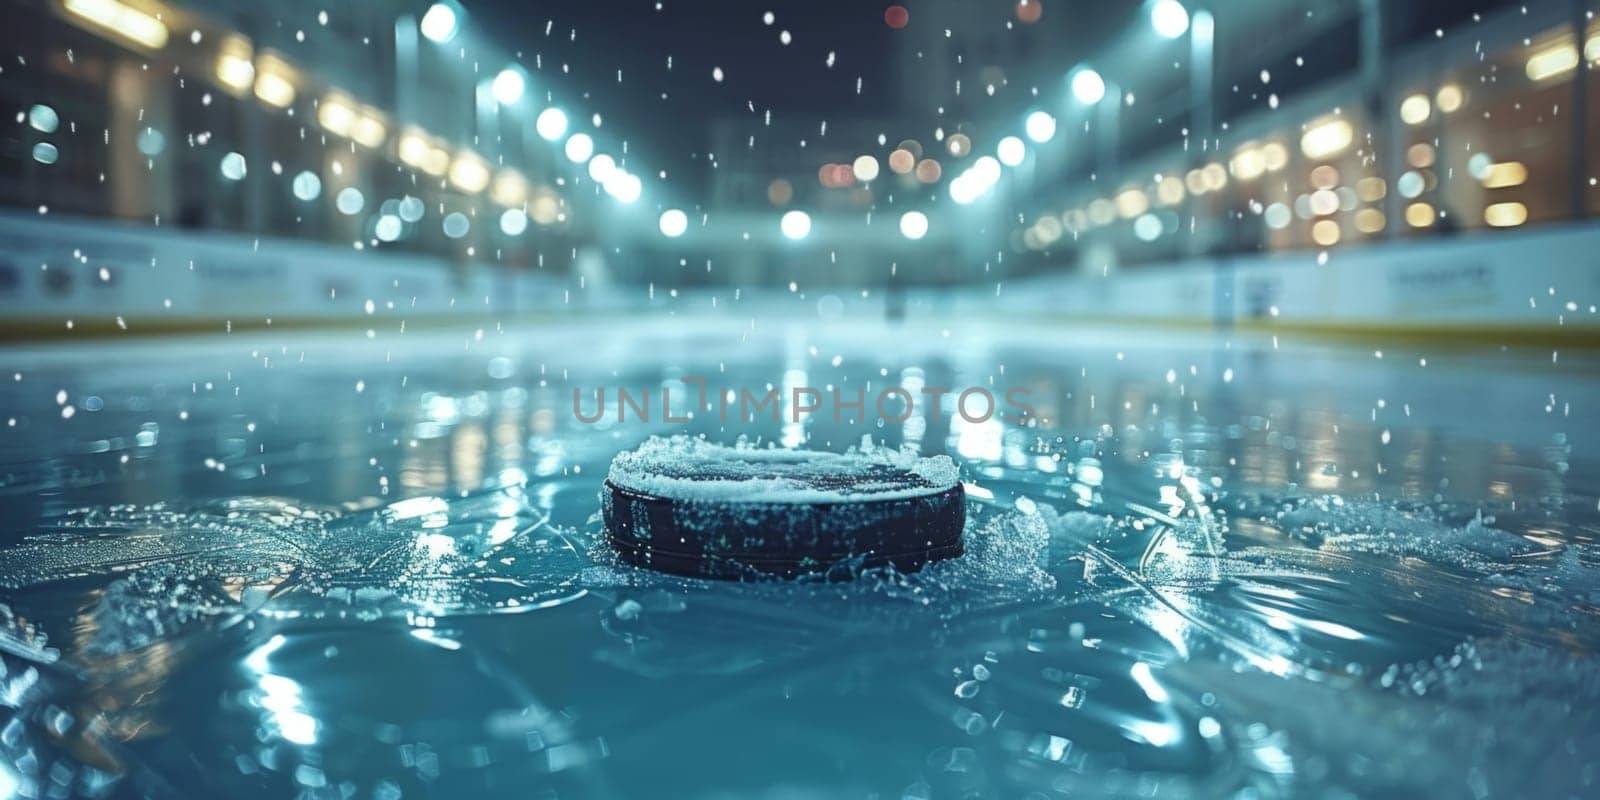 A hockey rink with a solitary puck resting in the center, waiting to be put in motion by players in a fast-paced game of strategy and skill.